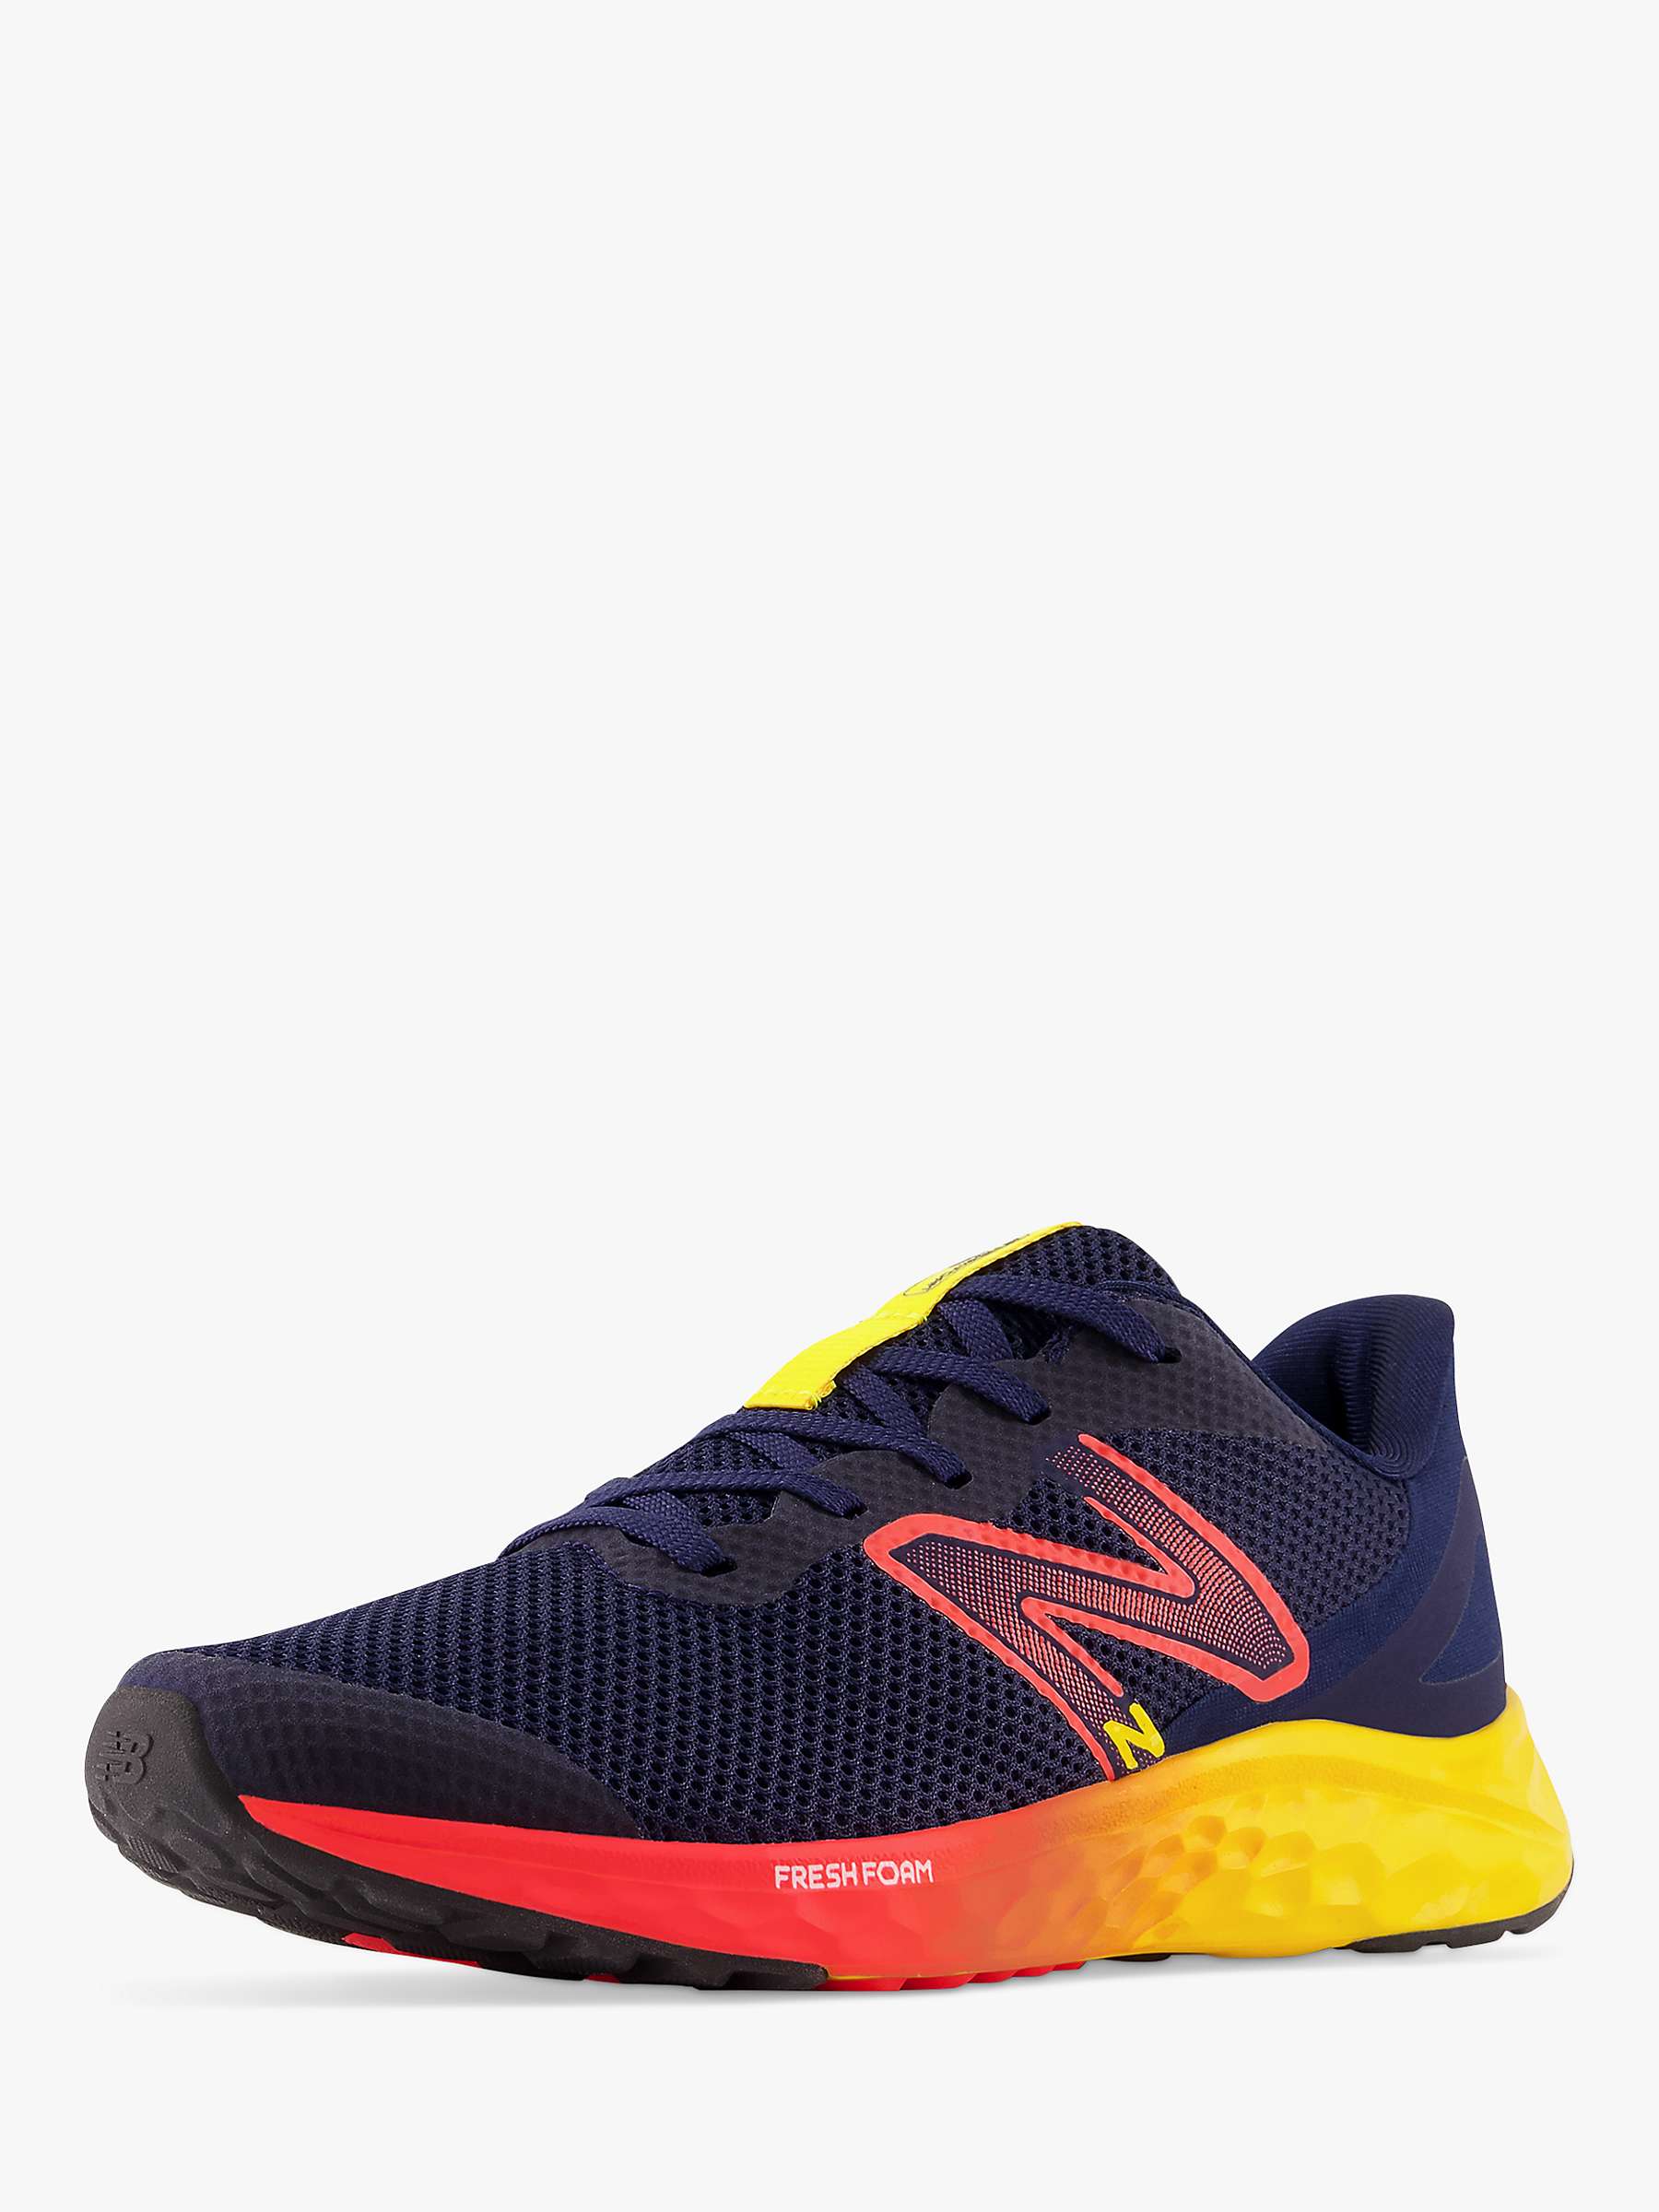 Buy New Balance Kids' Arishi v4 Multi Sole Lace-Up Running Trainers Online at johnlewis.com